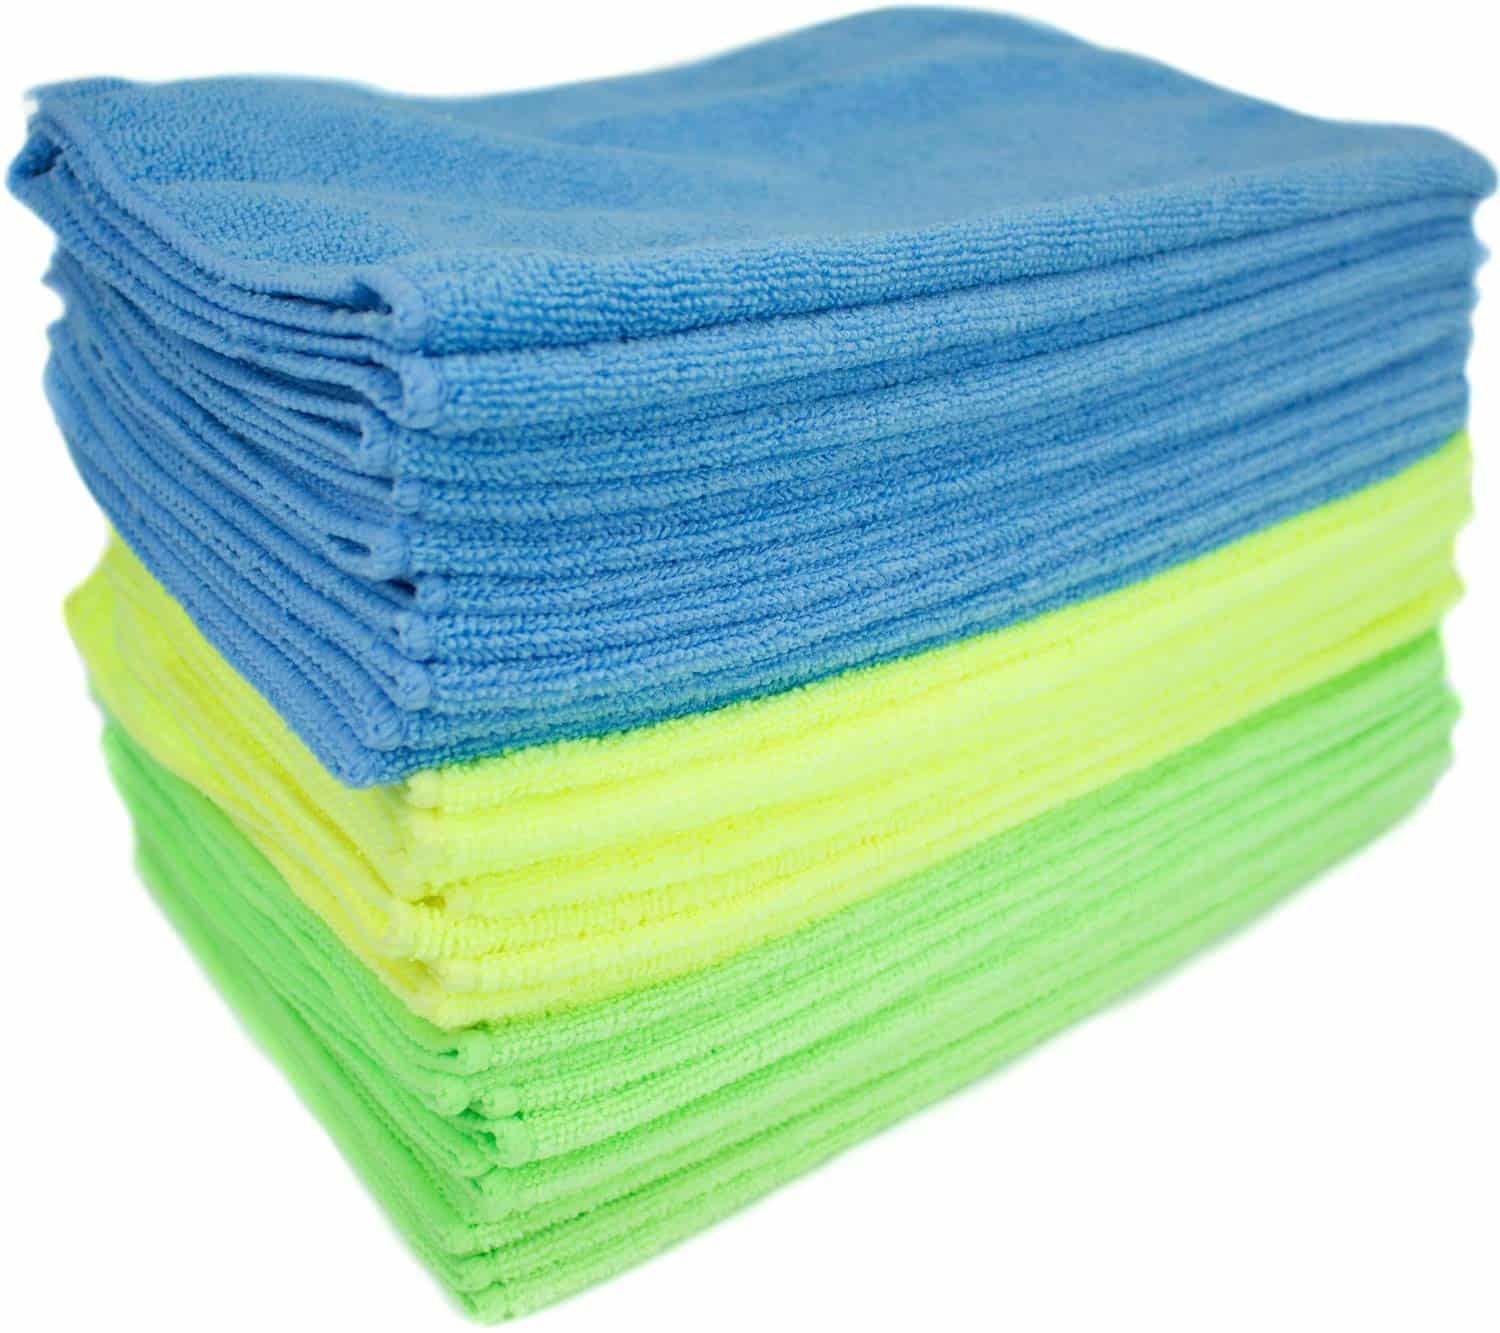 Zwipes 1015303 Microfiber Cleaning Cloths | All-Purpose | Assorted Colors | 36 Pack $19.24 (REG $39.99 )